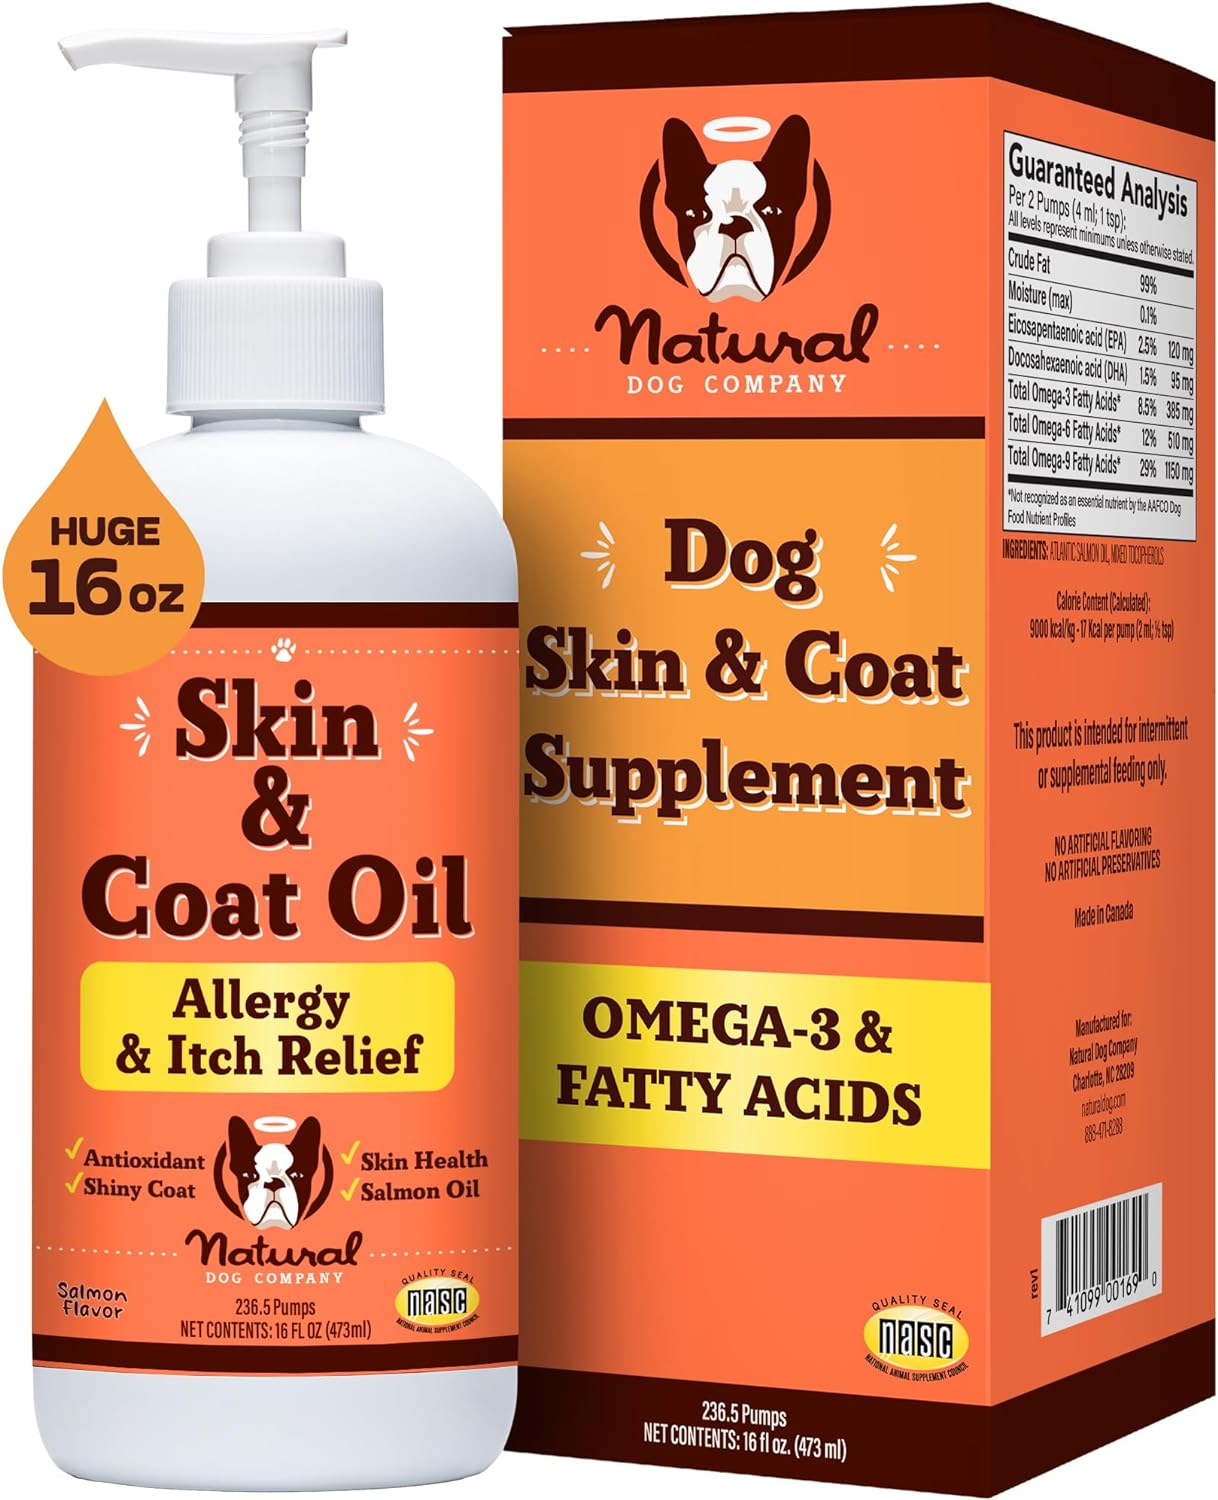 Natural Dog Company Skin & Coat Oil (16 oz.), Supports Skin Health, Fish Oil Supplements for Dogs, Soft Coat, Salmon Oil & Flaxseed Oil, Fatty Acids, Bottle of Dog Fish Oil with Pump, Antioxidant